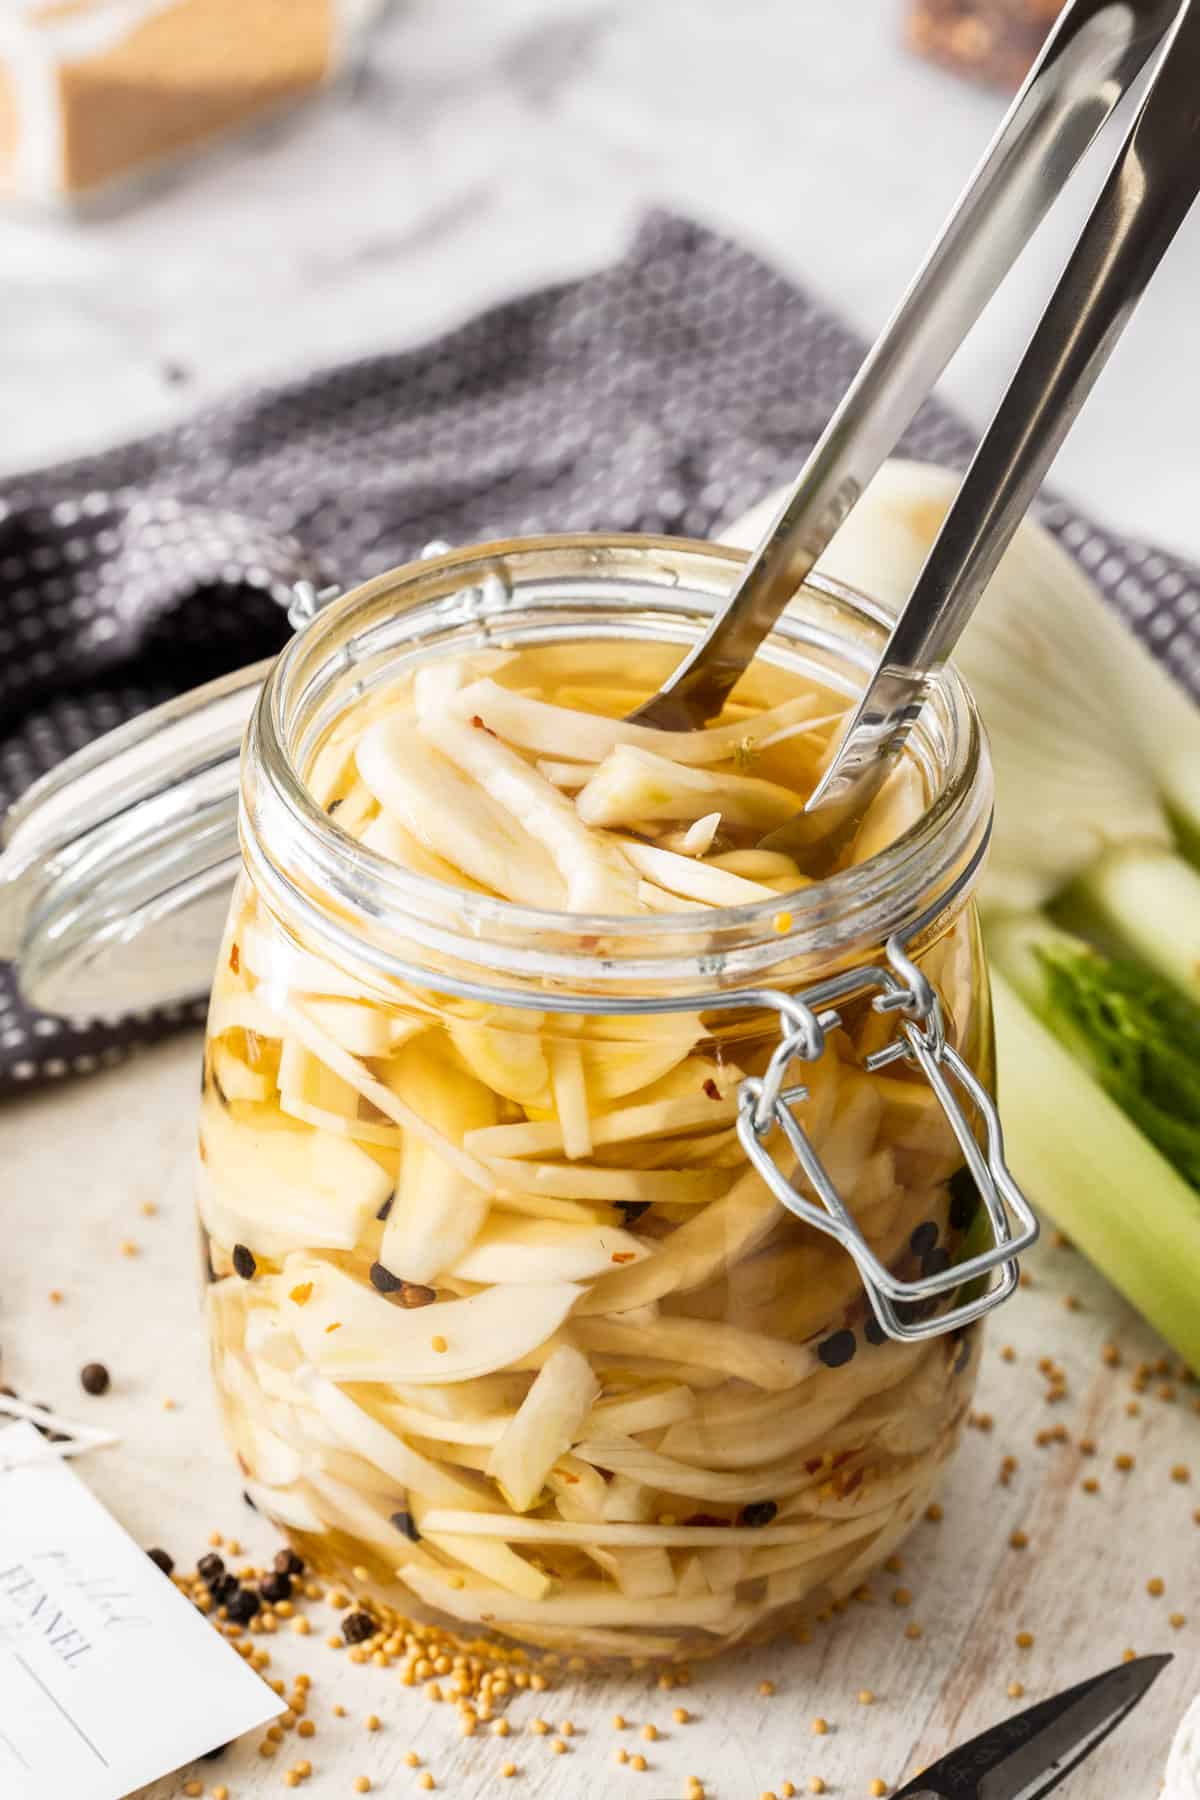 Jar of Pickled Fennel, sitting on a wooden board, with some tongs reaching in to pick up some pieces of fennel.